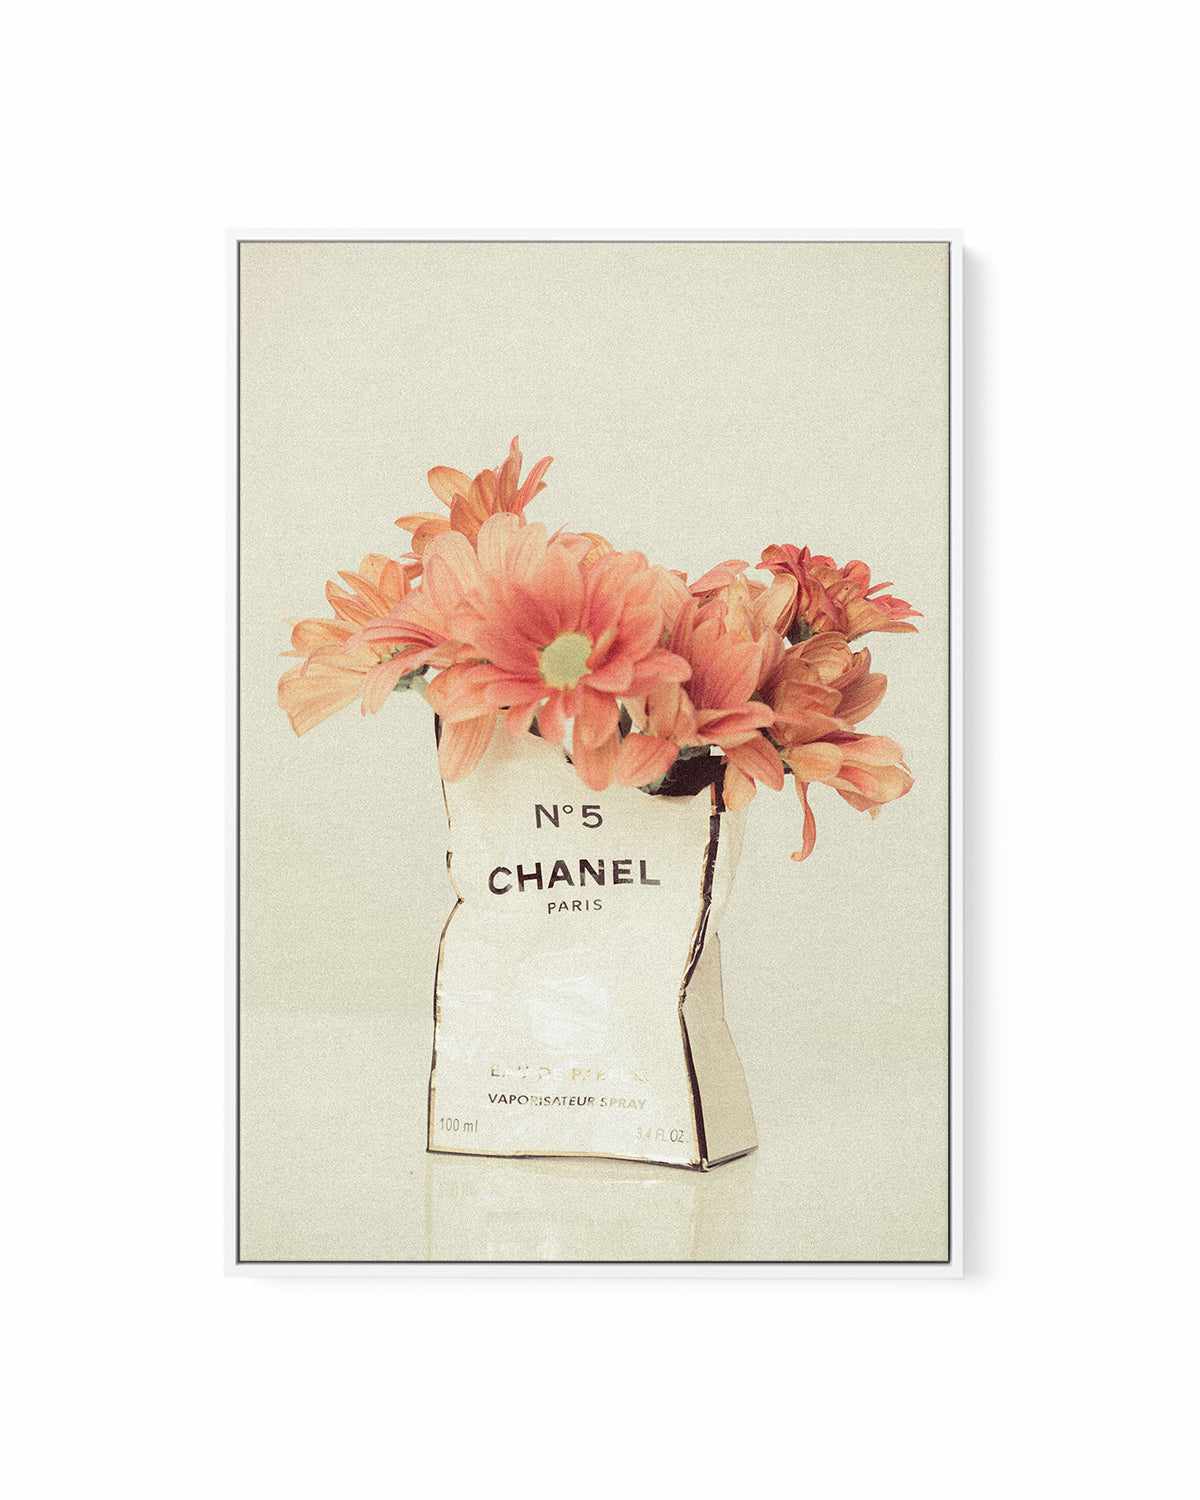 Buy 'Pink Flowers Chanel' by Mario Stefanelli Framed Canvas Art Print